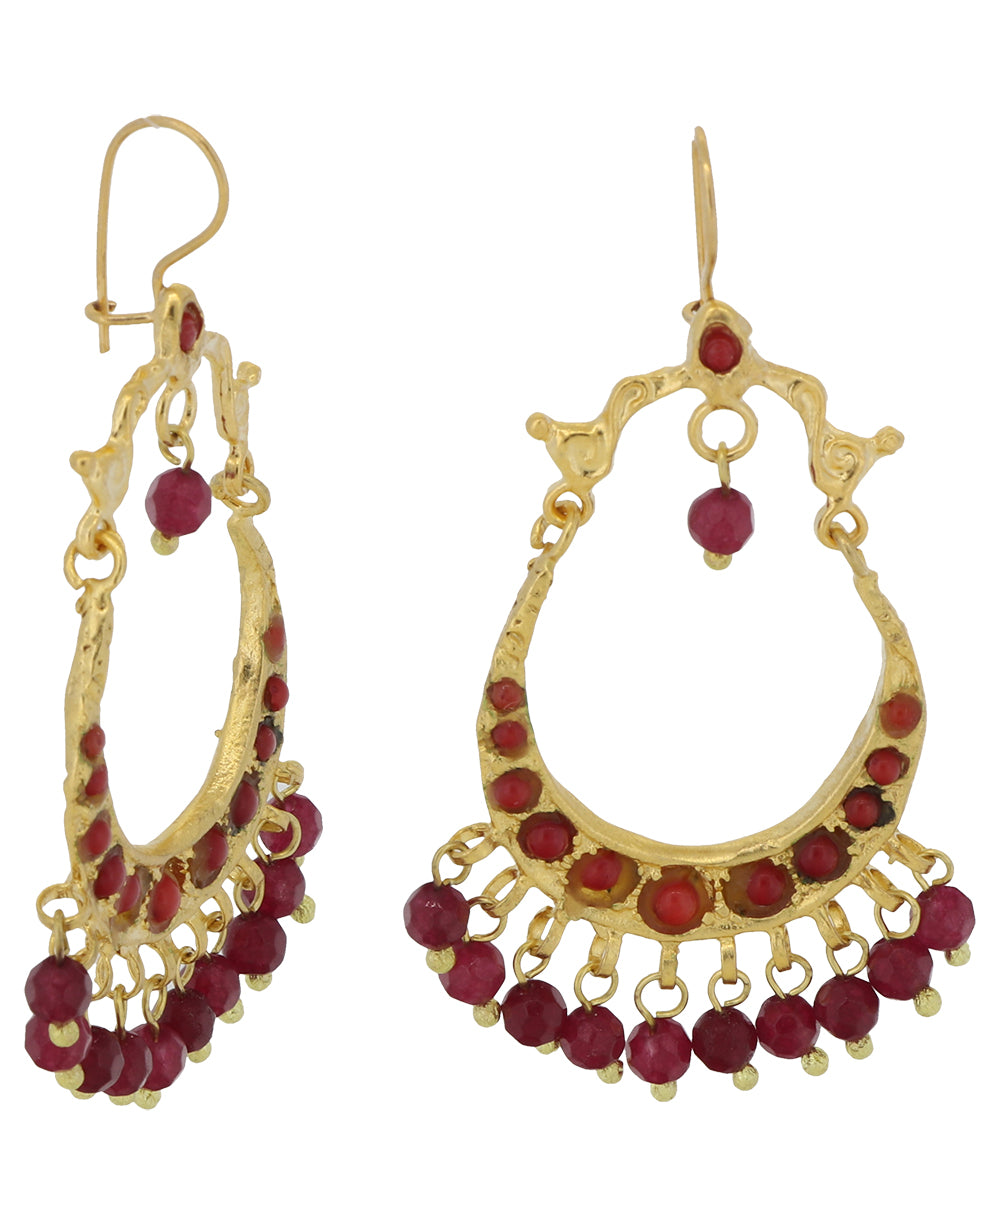 Unique U-Shaped Gold Earrings featuring Dangling Red Agate Beads and Secure Hook Closure